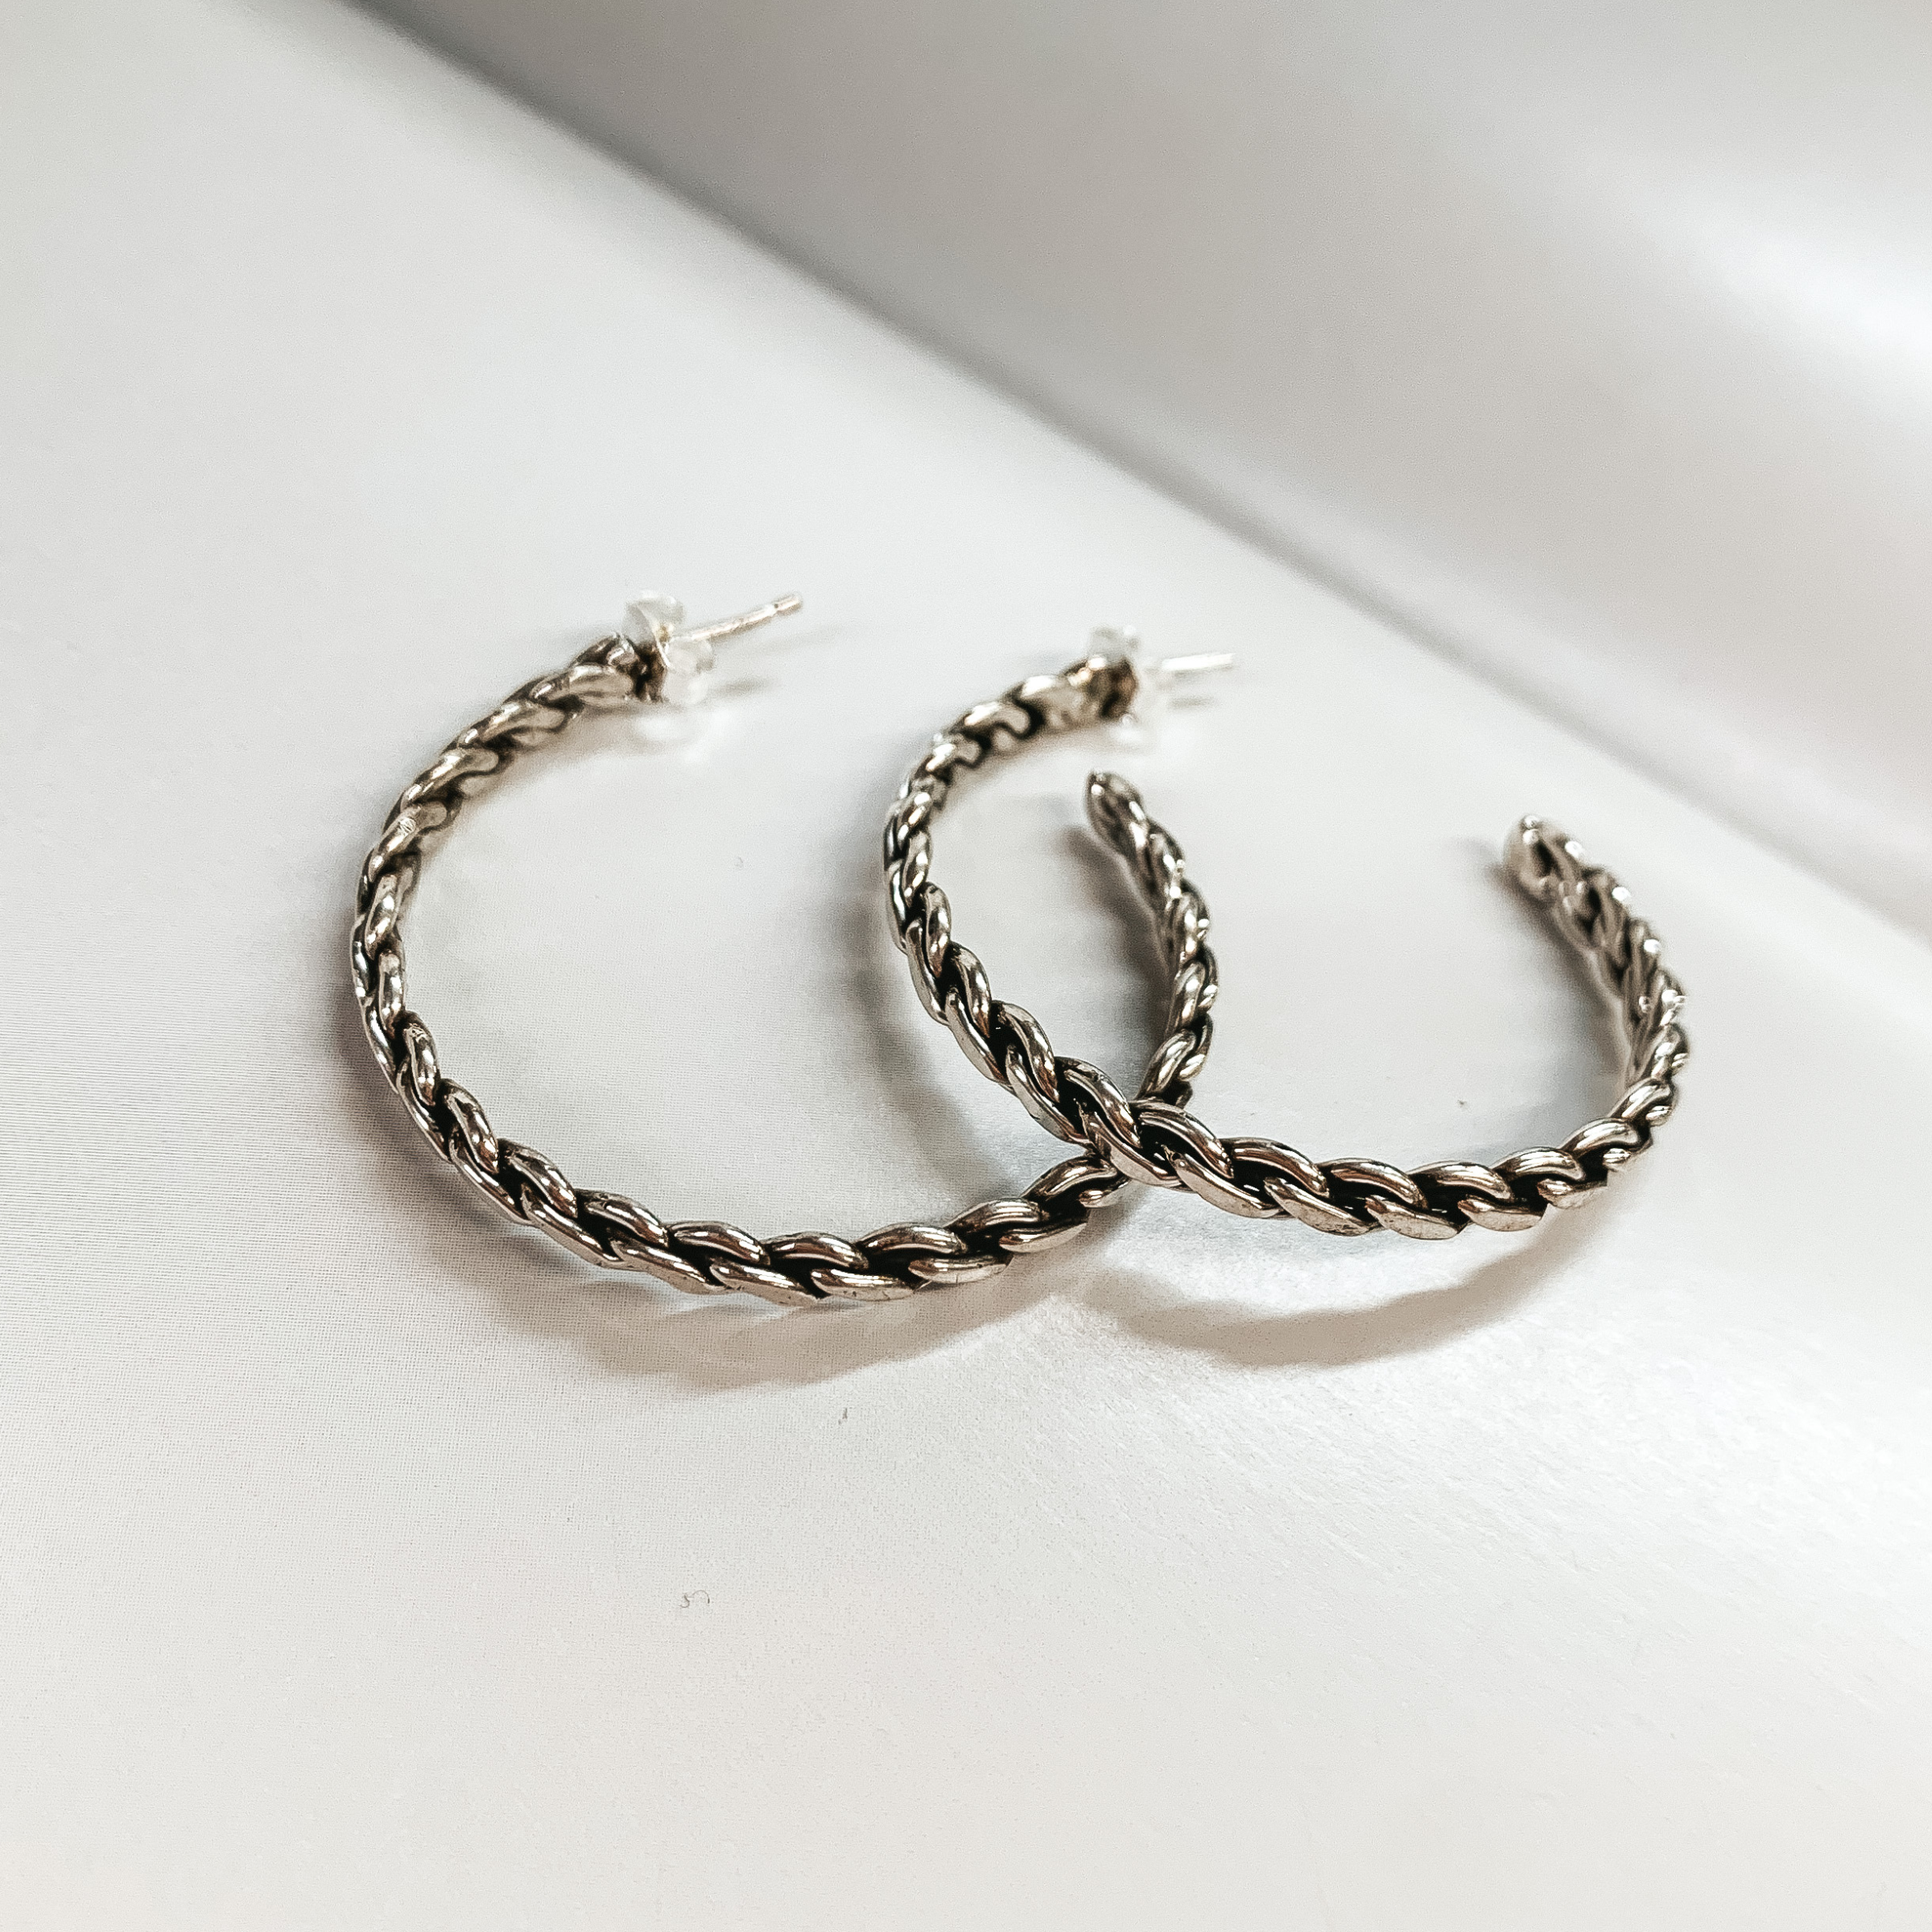 Navajo | Navajo Handmade Sterling Silver Rope Chain Hoop Earrings - Giddy Up Glamour Boutique